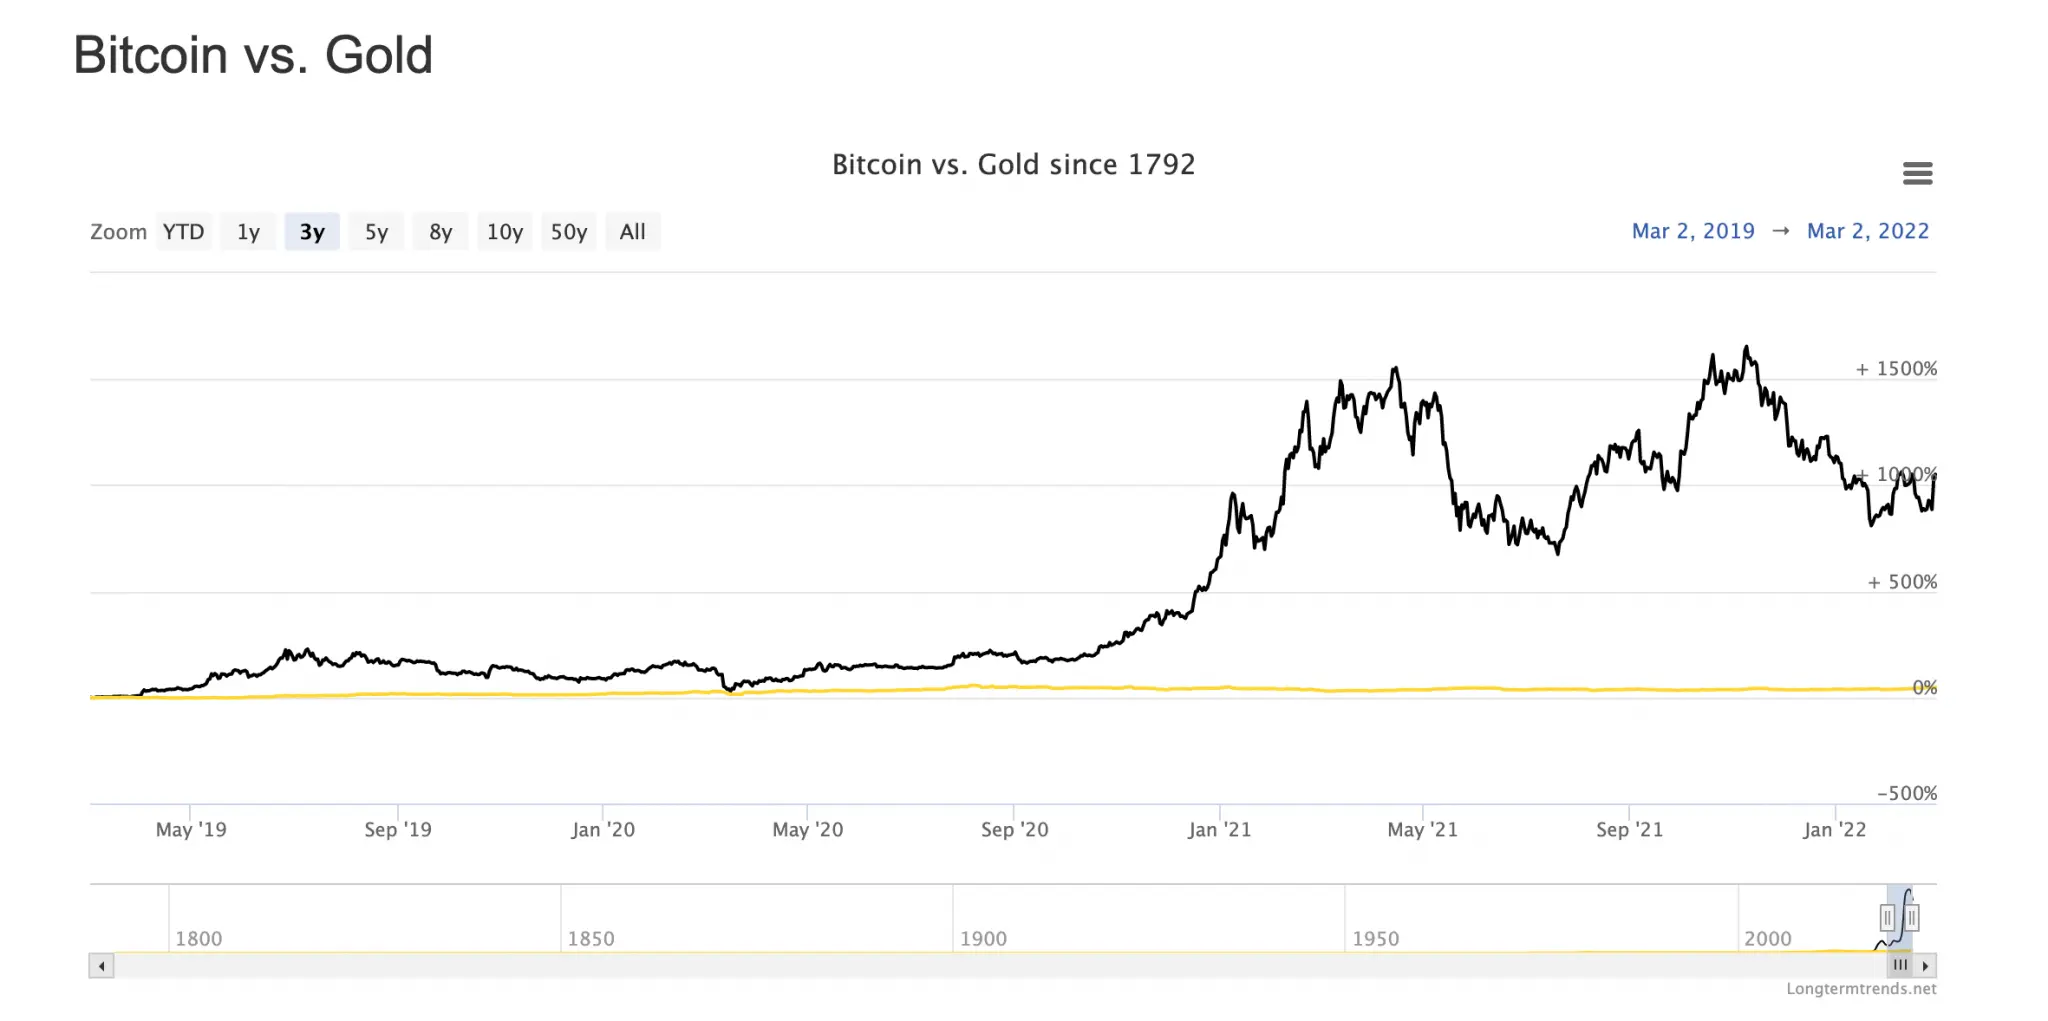 Bitcoin vs Gold in the last three years